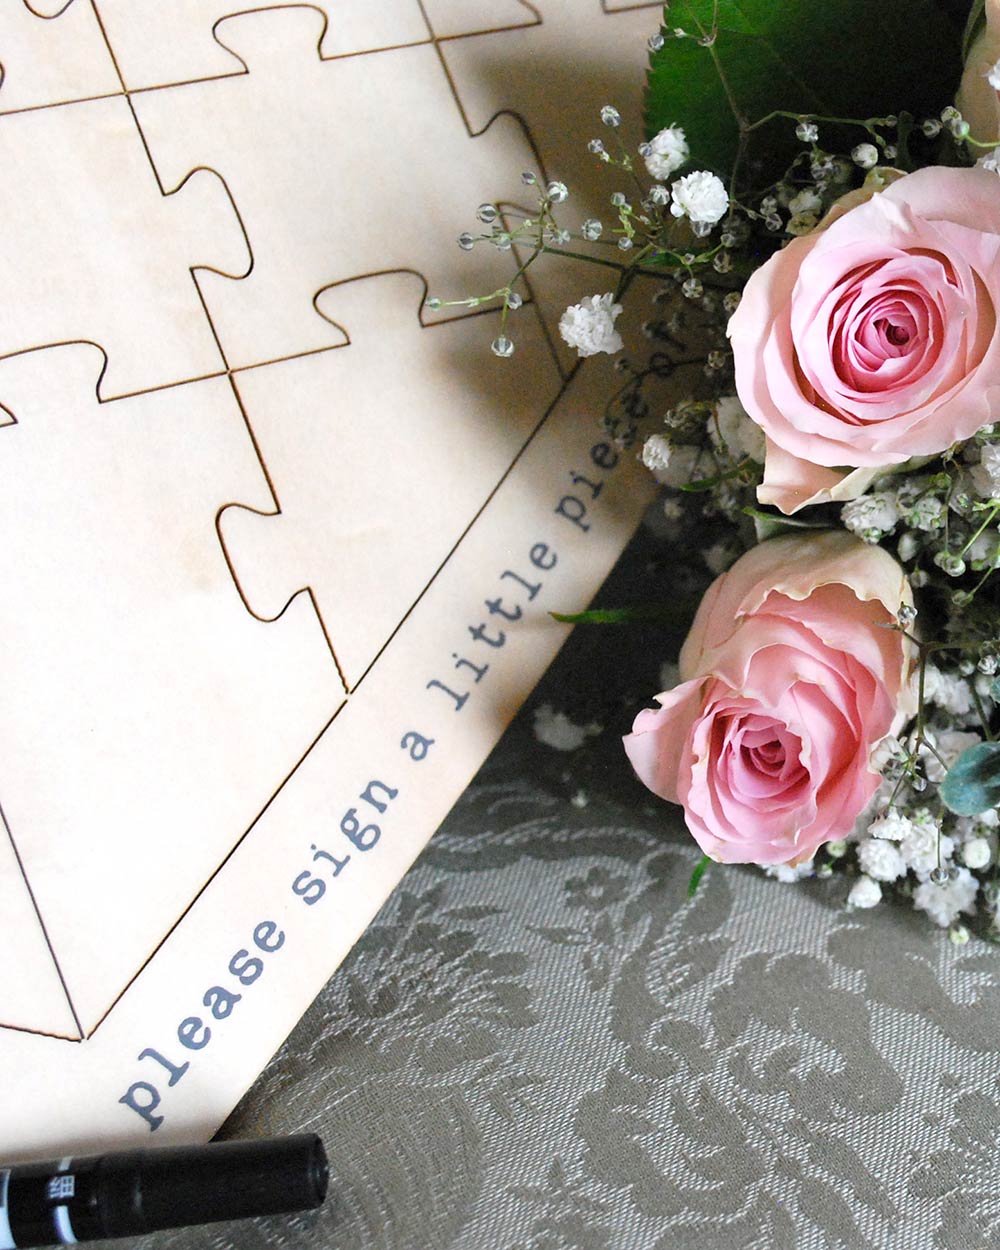 Wedding Guest Book Large Heart Jigsaw Puzzle